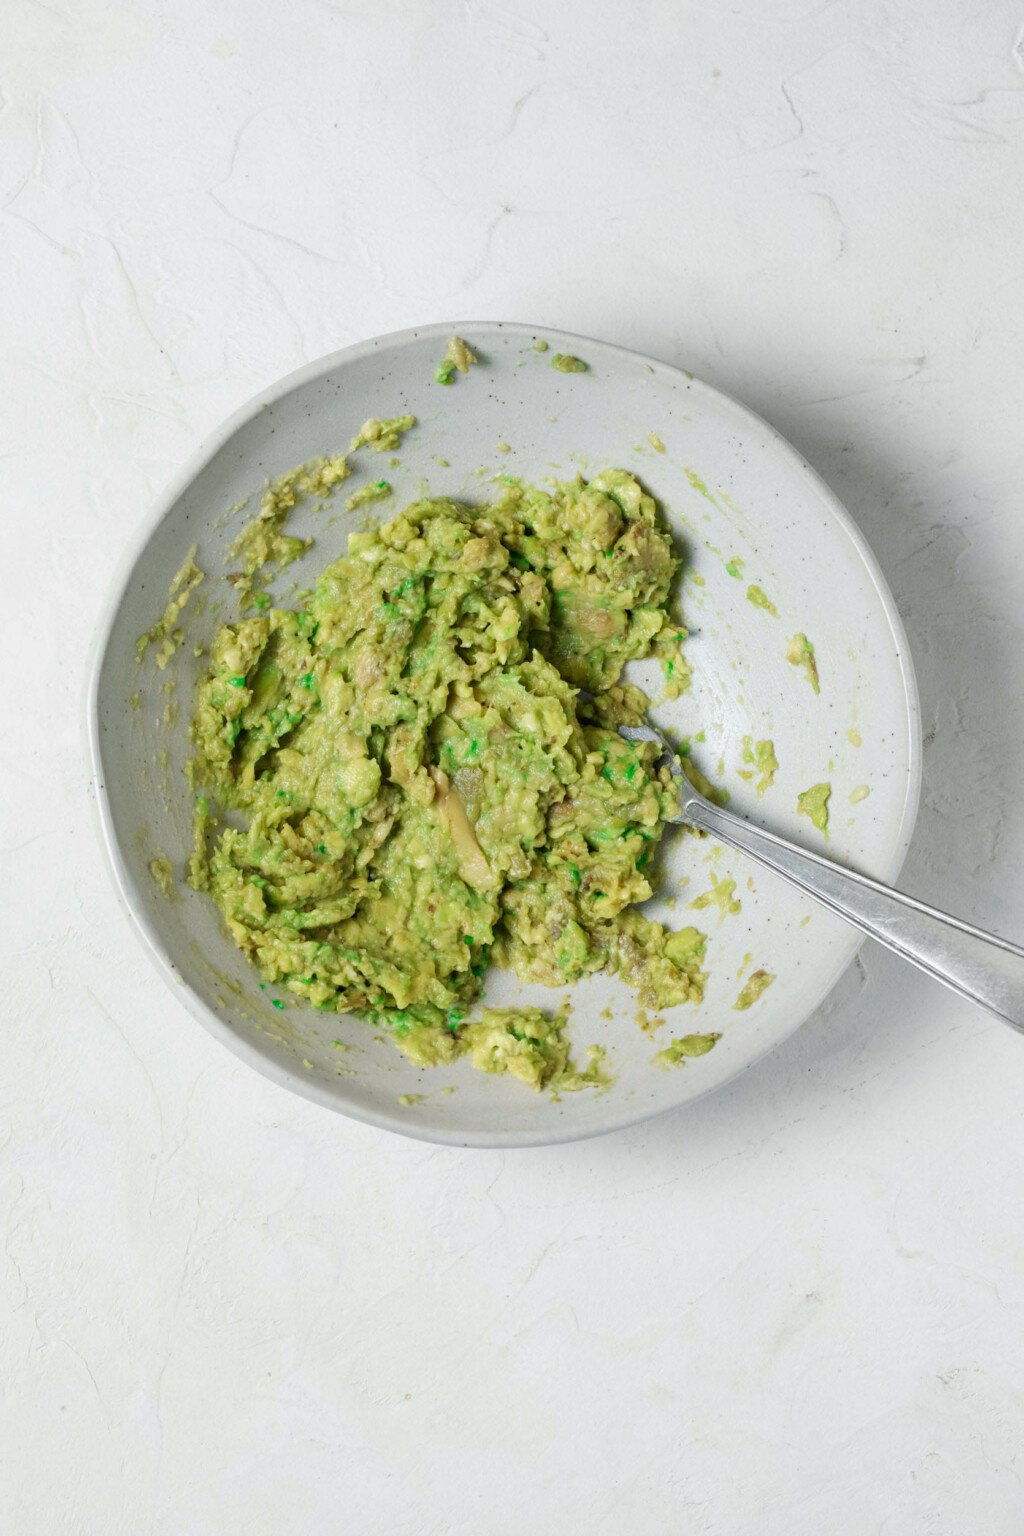 An overhead image of a white bowl, which contains pale green, mashed avocado.